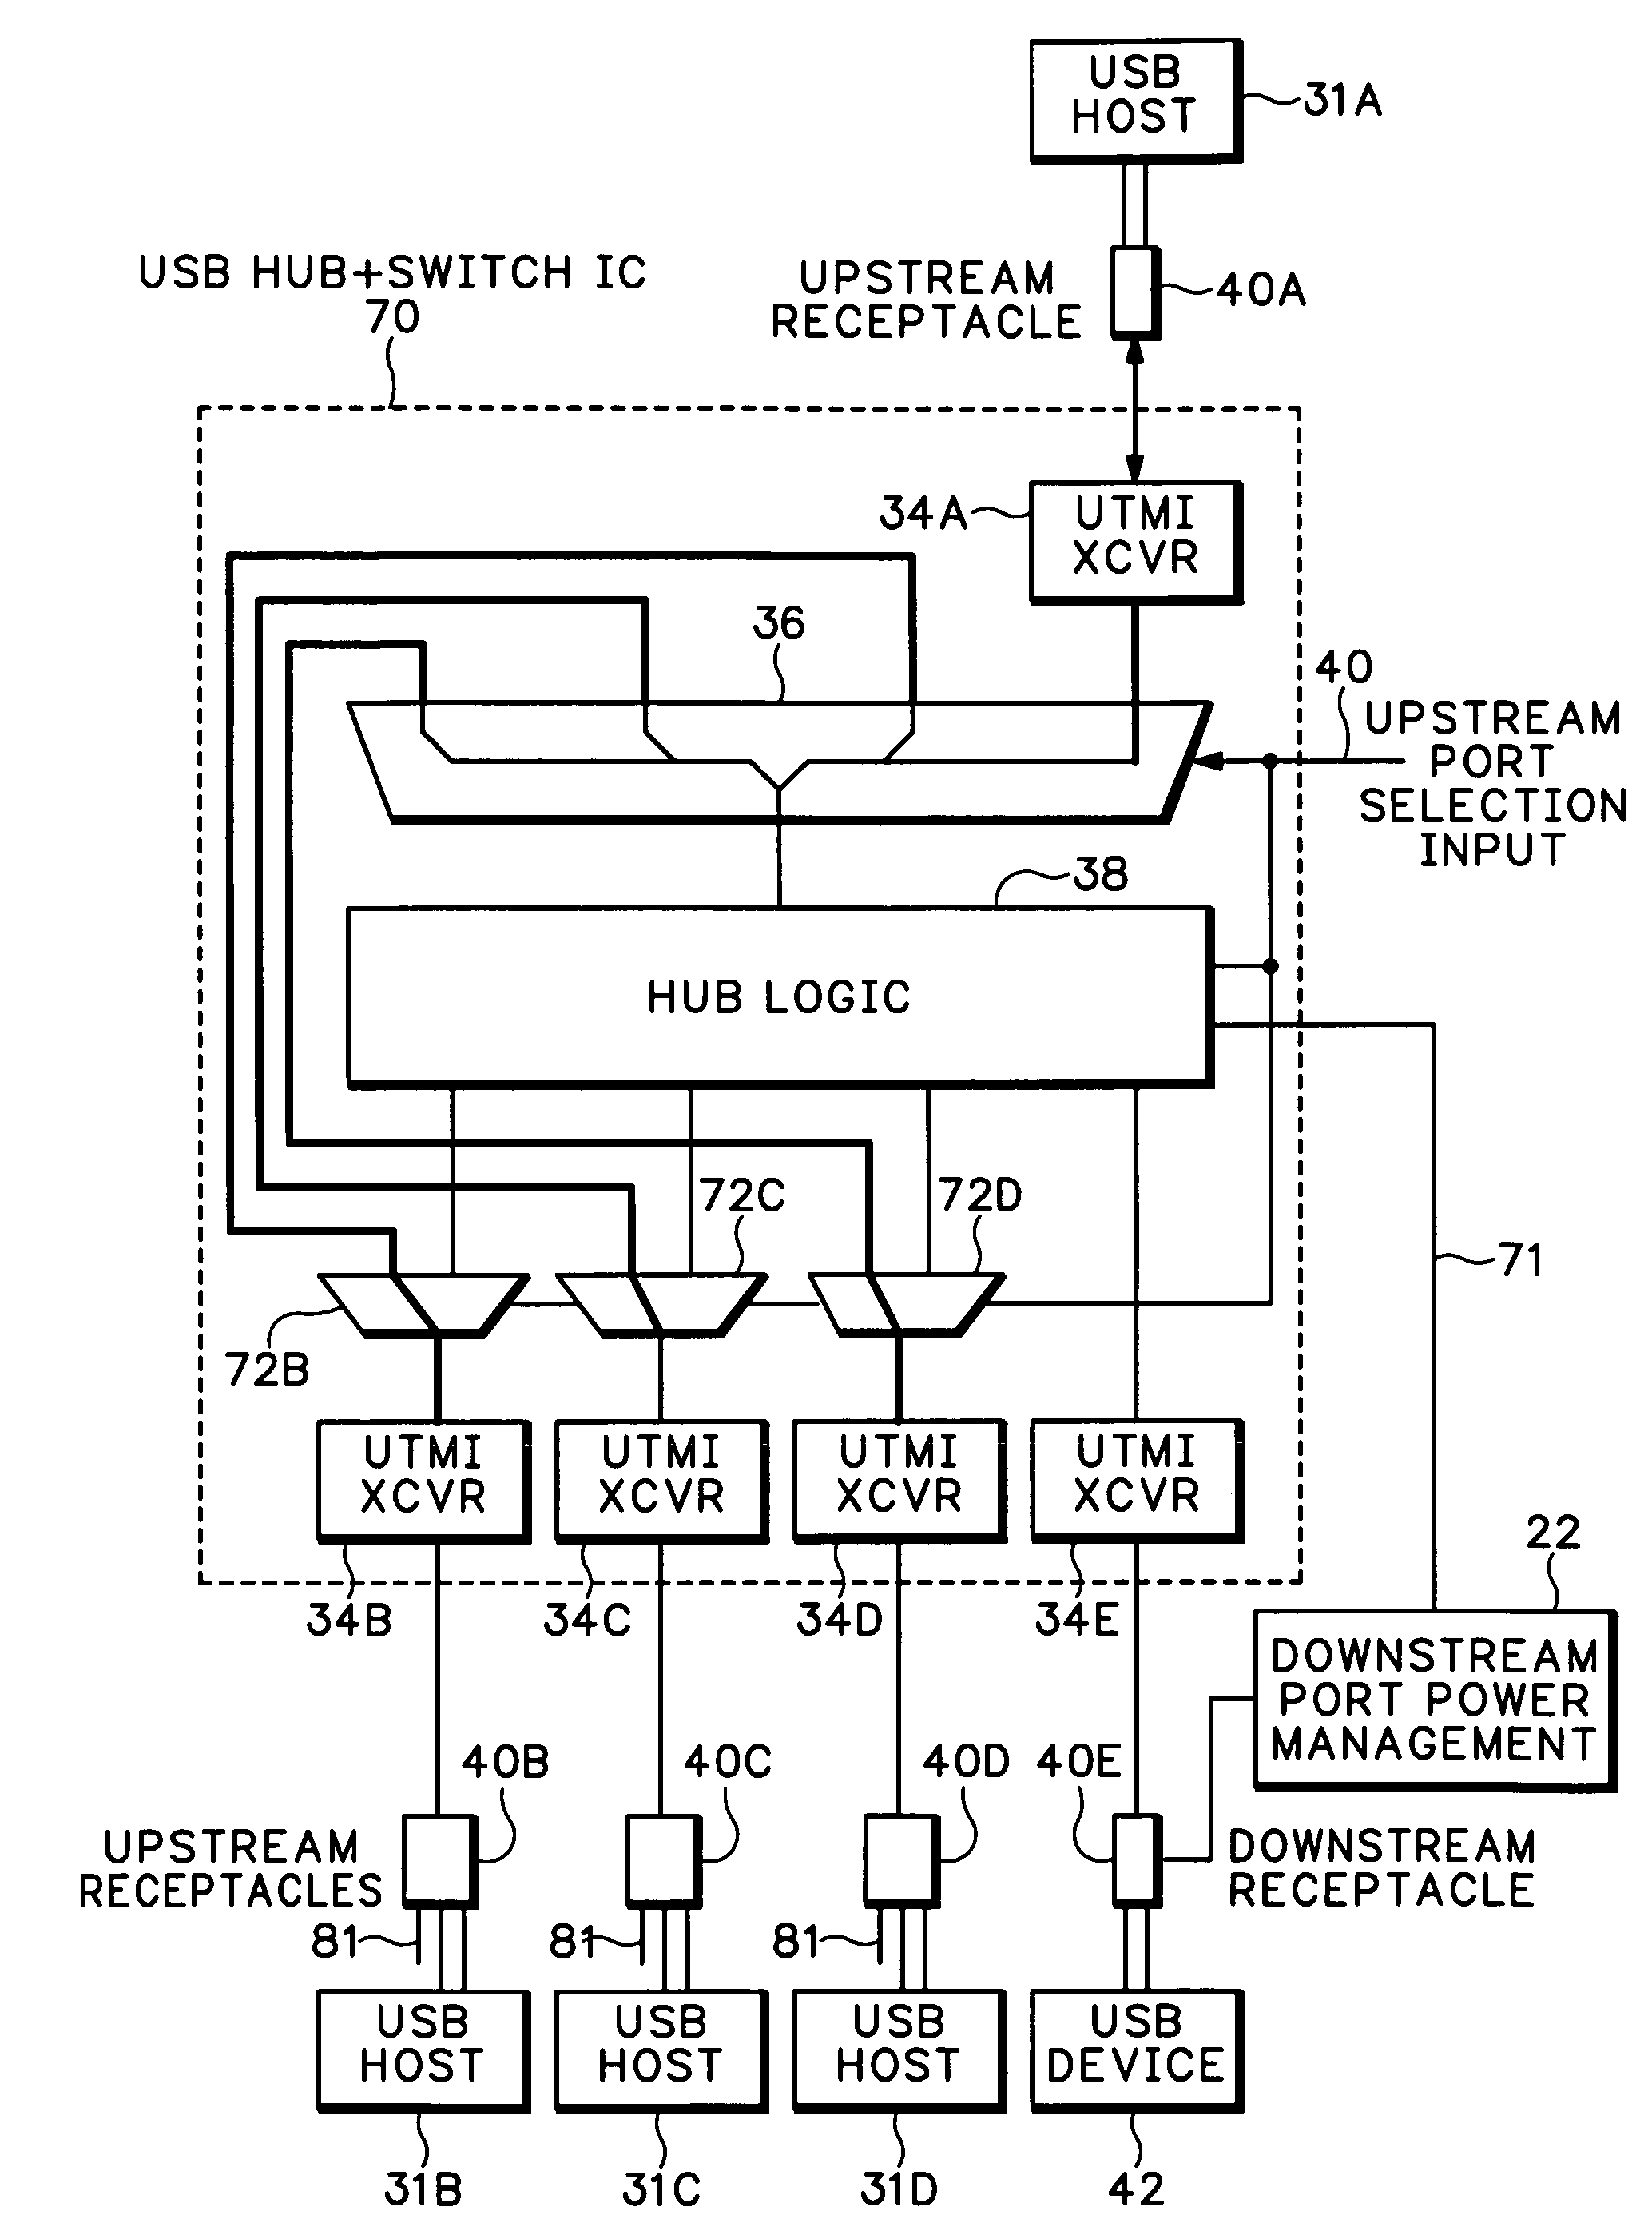 Method and apparatus for switching USB devices between multiple USB hosts